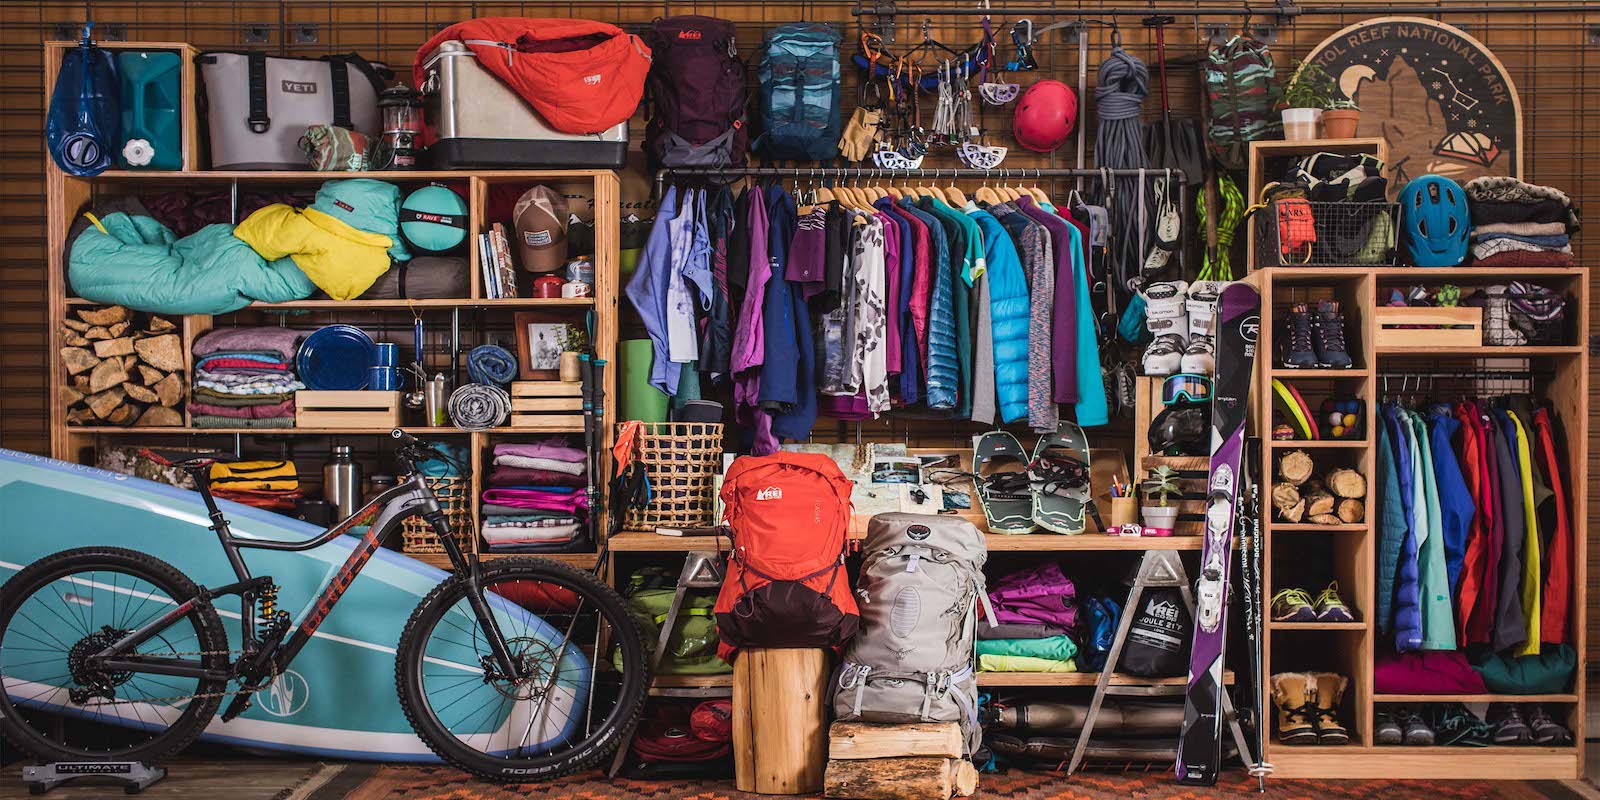 How to Buy Used Outdoor Gear and Clothing